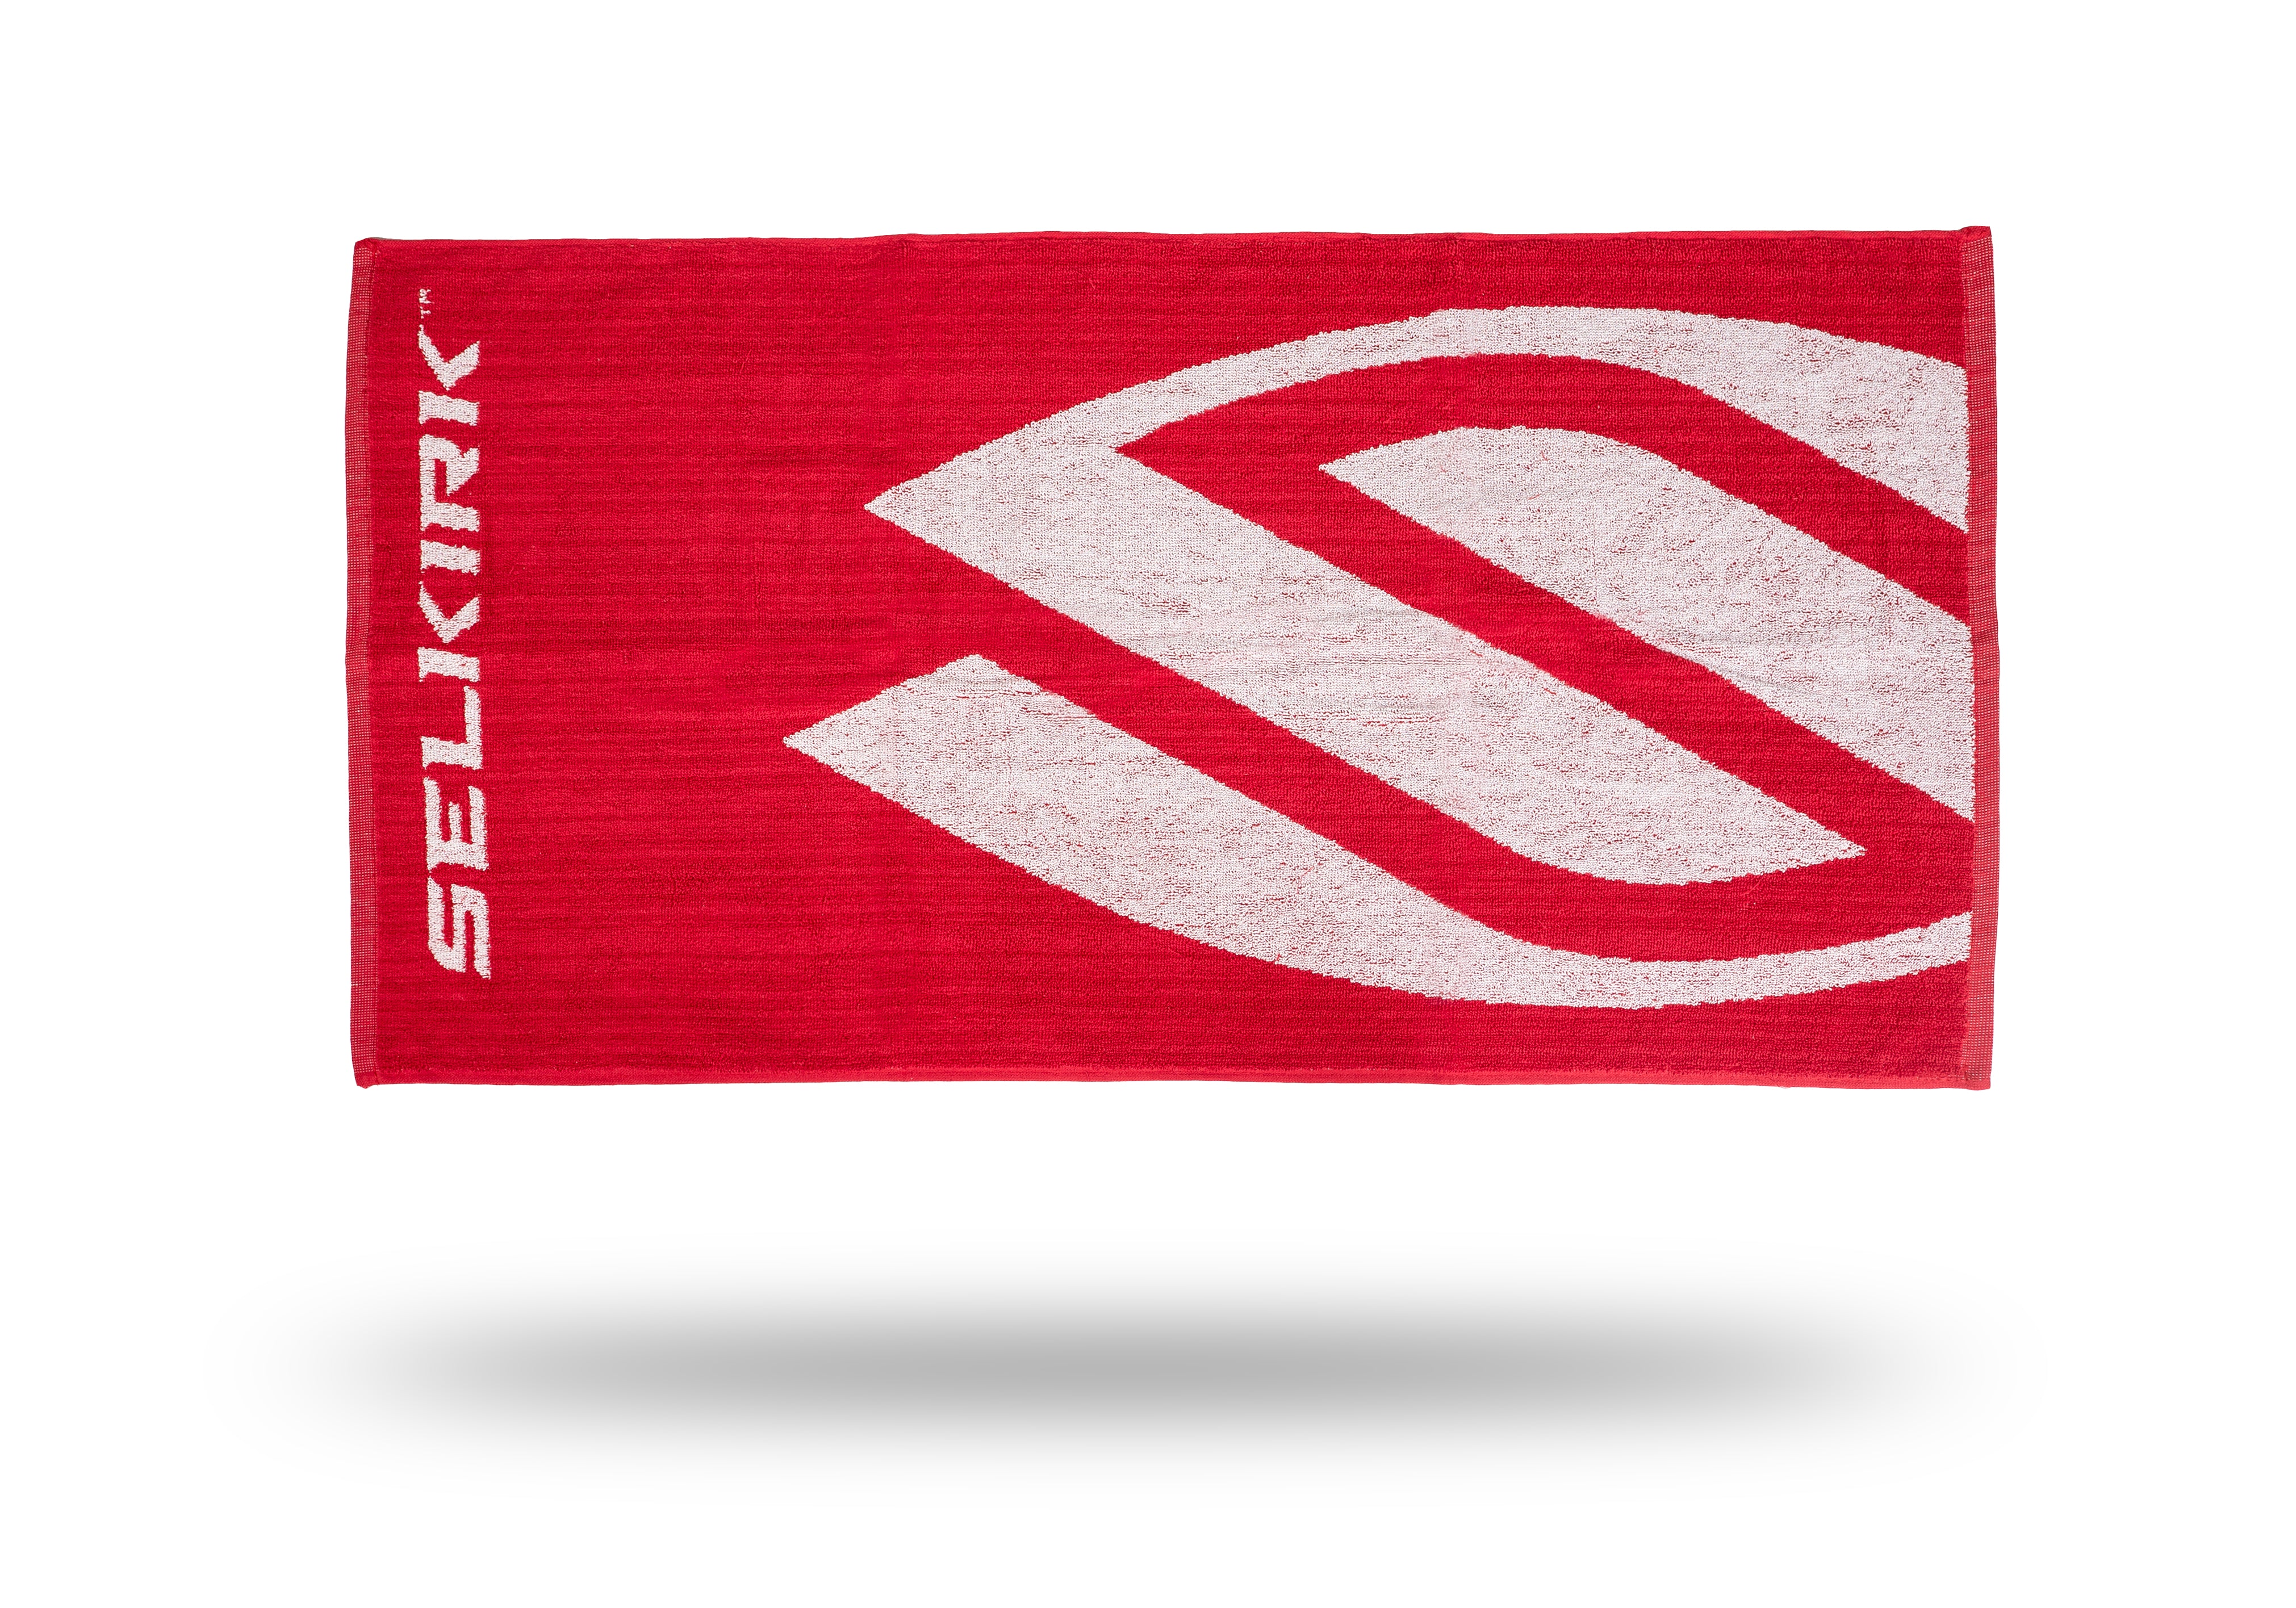 Selkirk Cotton Towel - 19 x 36 Red/White